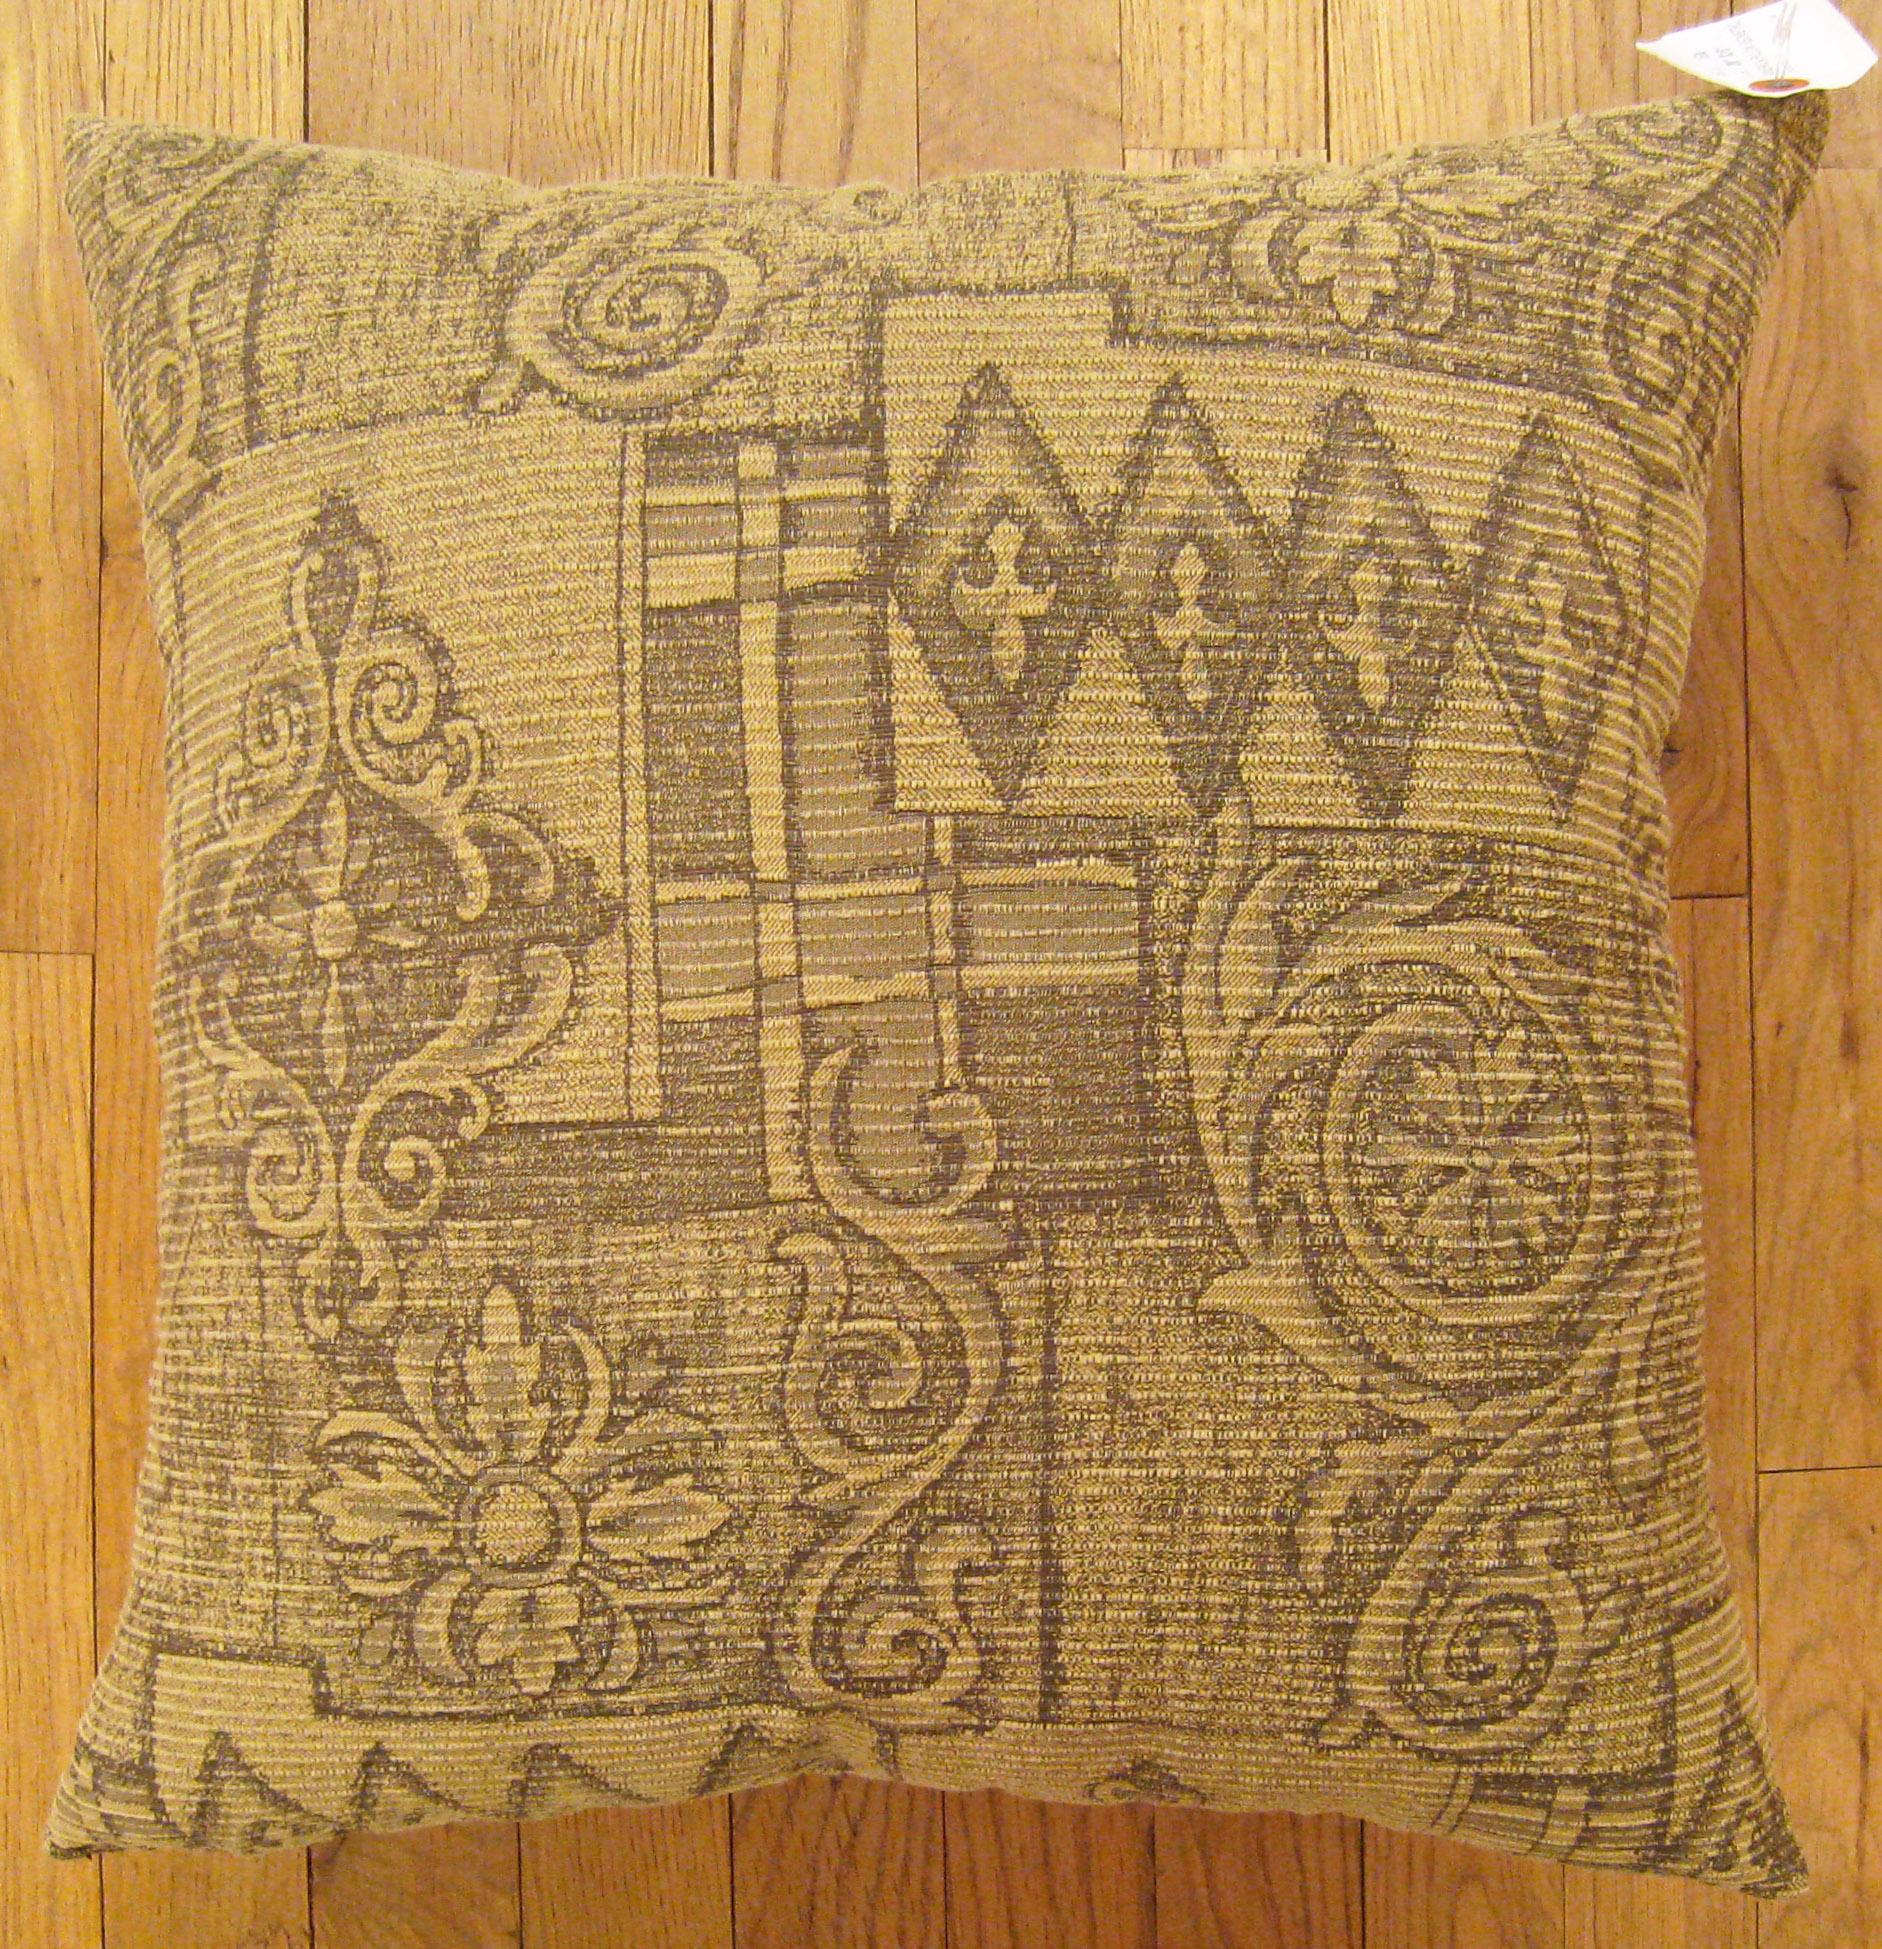 Vintage Floro-geometric fabric pillow; size 1'8” x 1'6”.

A vintage american pillow with geometric abstracts in a beige central field, size 1'8” x 1'6”. This lovely decorative pillow features a vintage fabric of a American floro-geometric style on